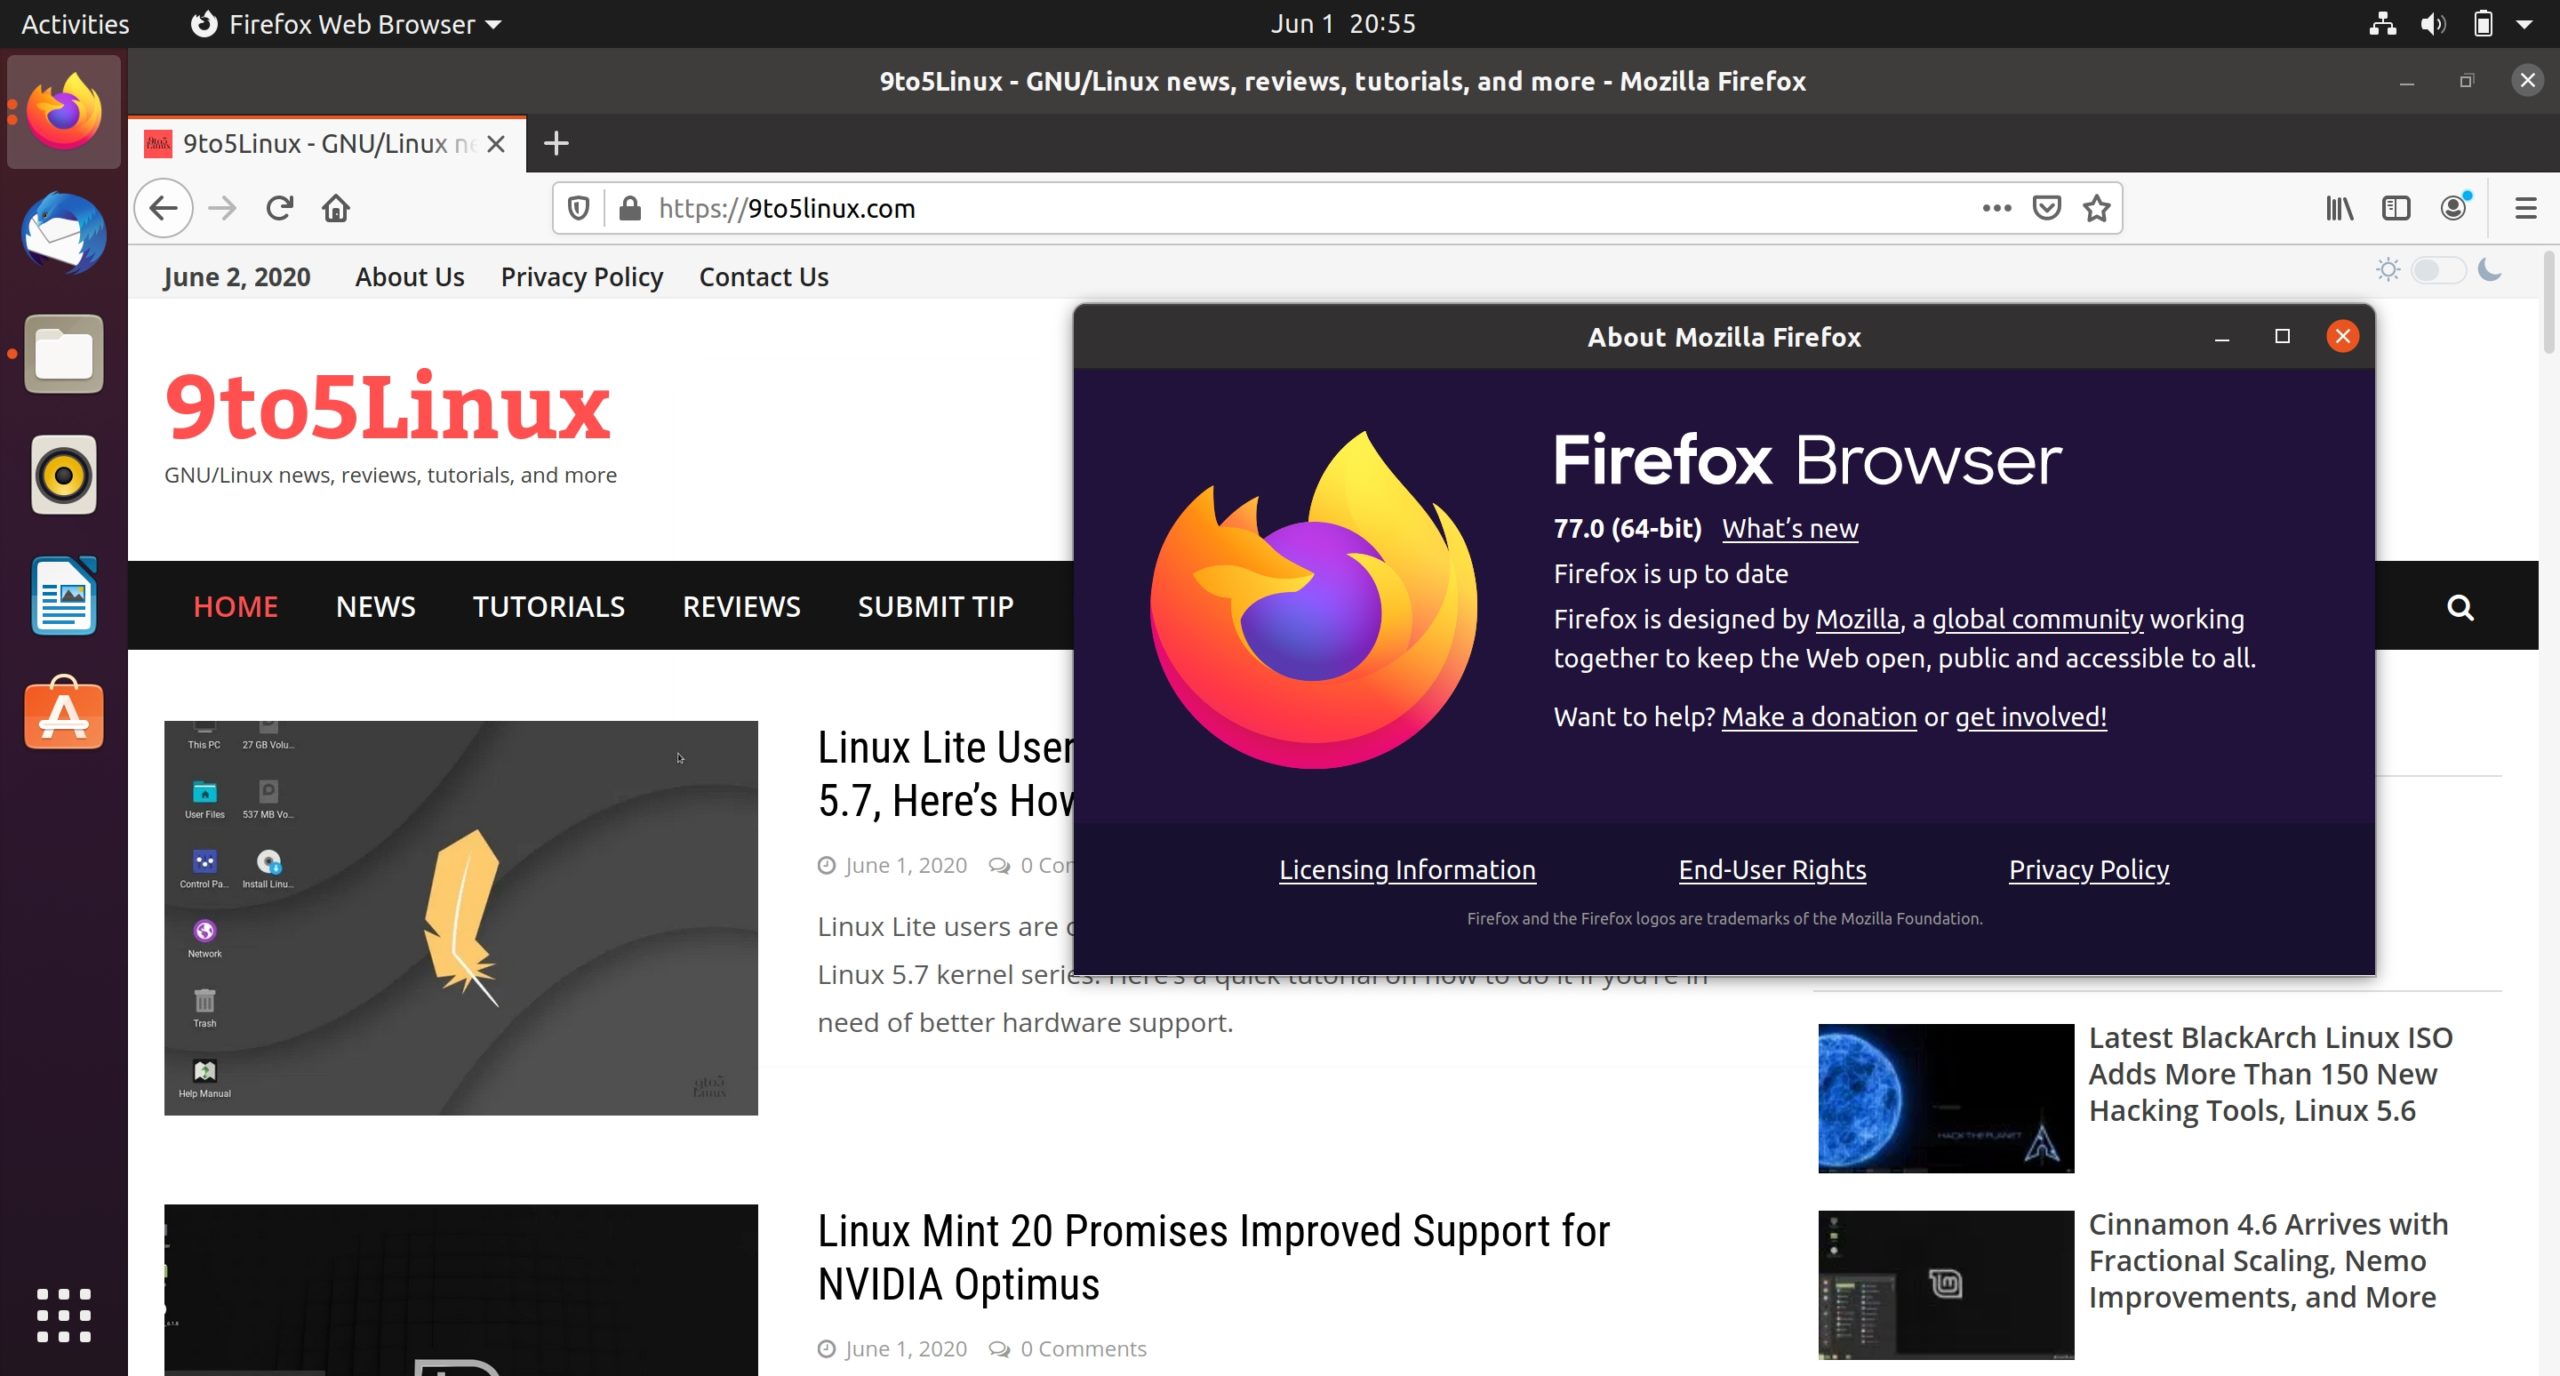 Mozilla Firefox 77 Is Now Available for Download, Here’s What’s New